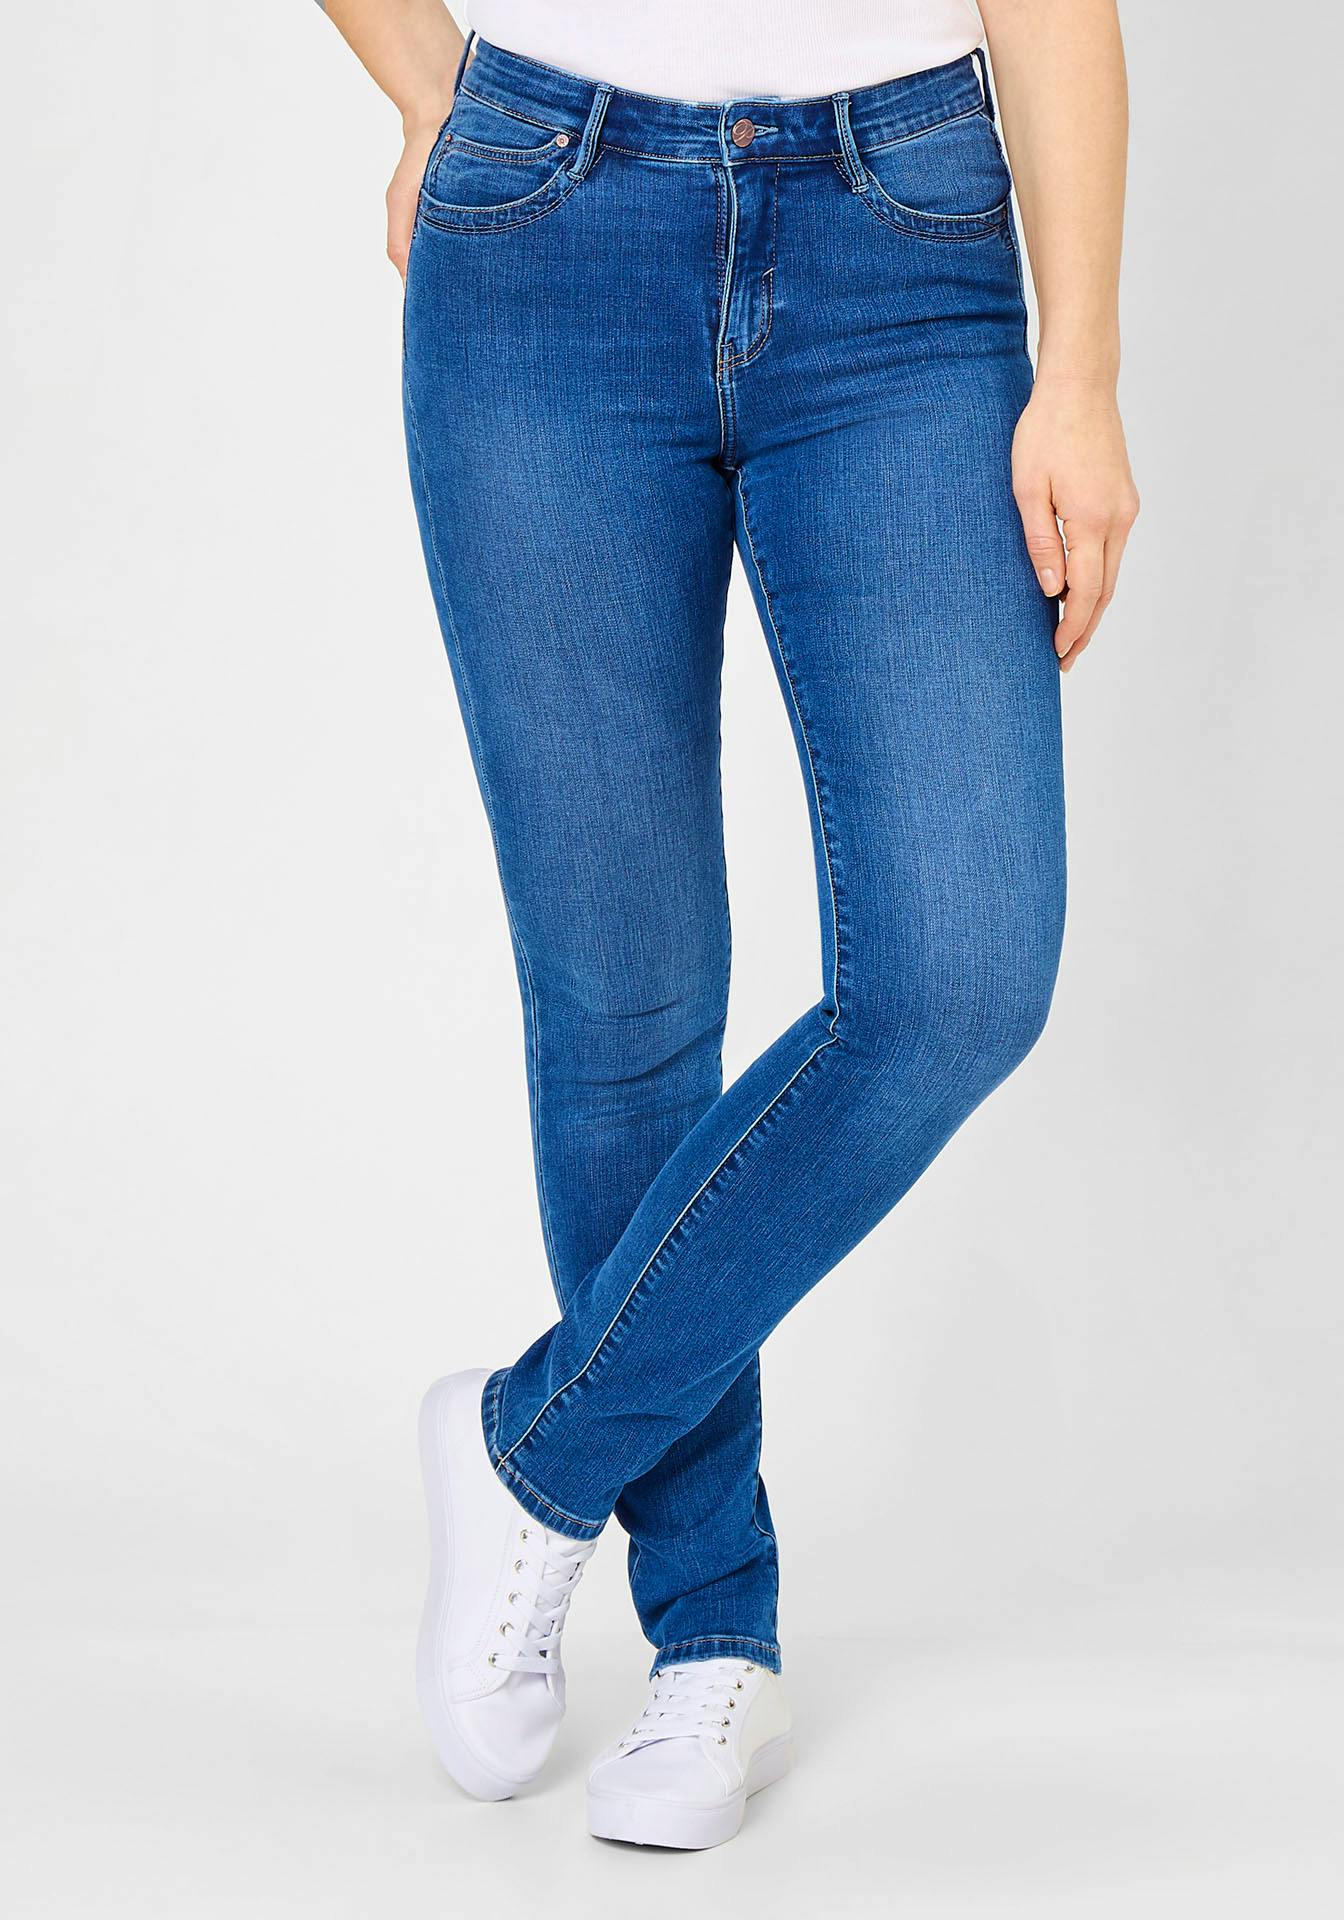 Image of Paddock&#039s Pat Jeans Slim Fit stone soft